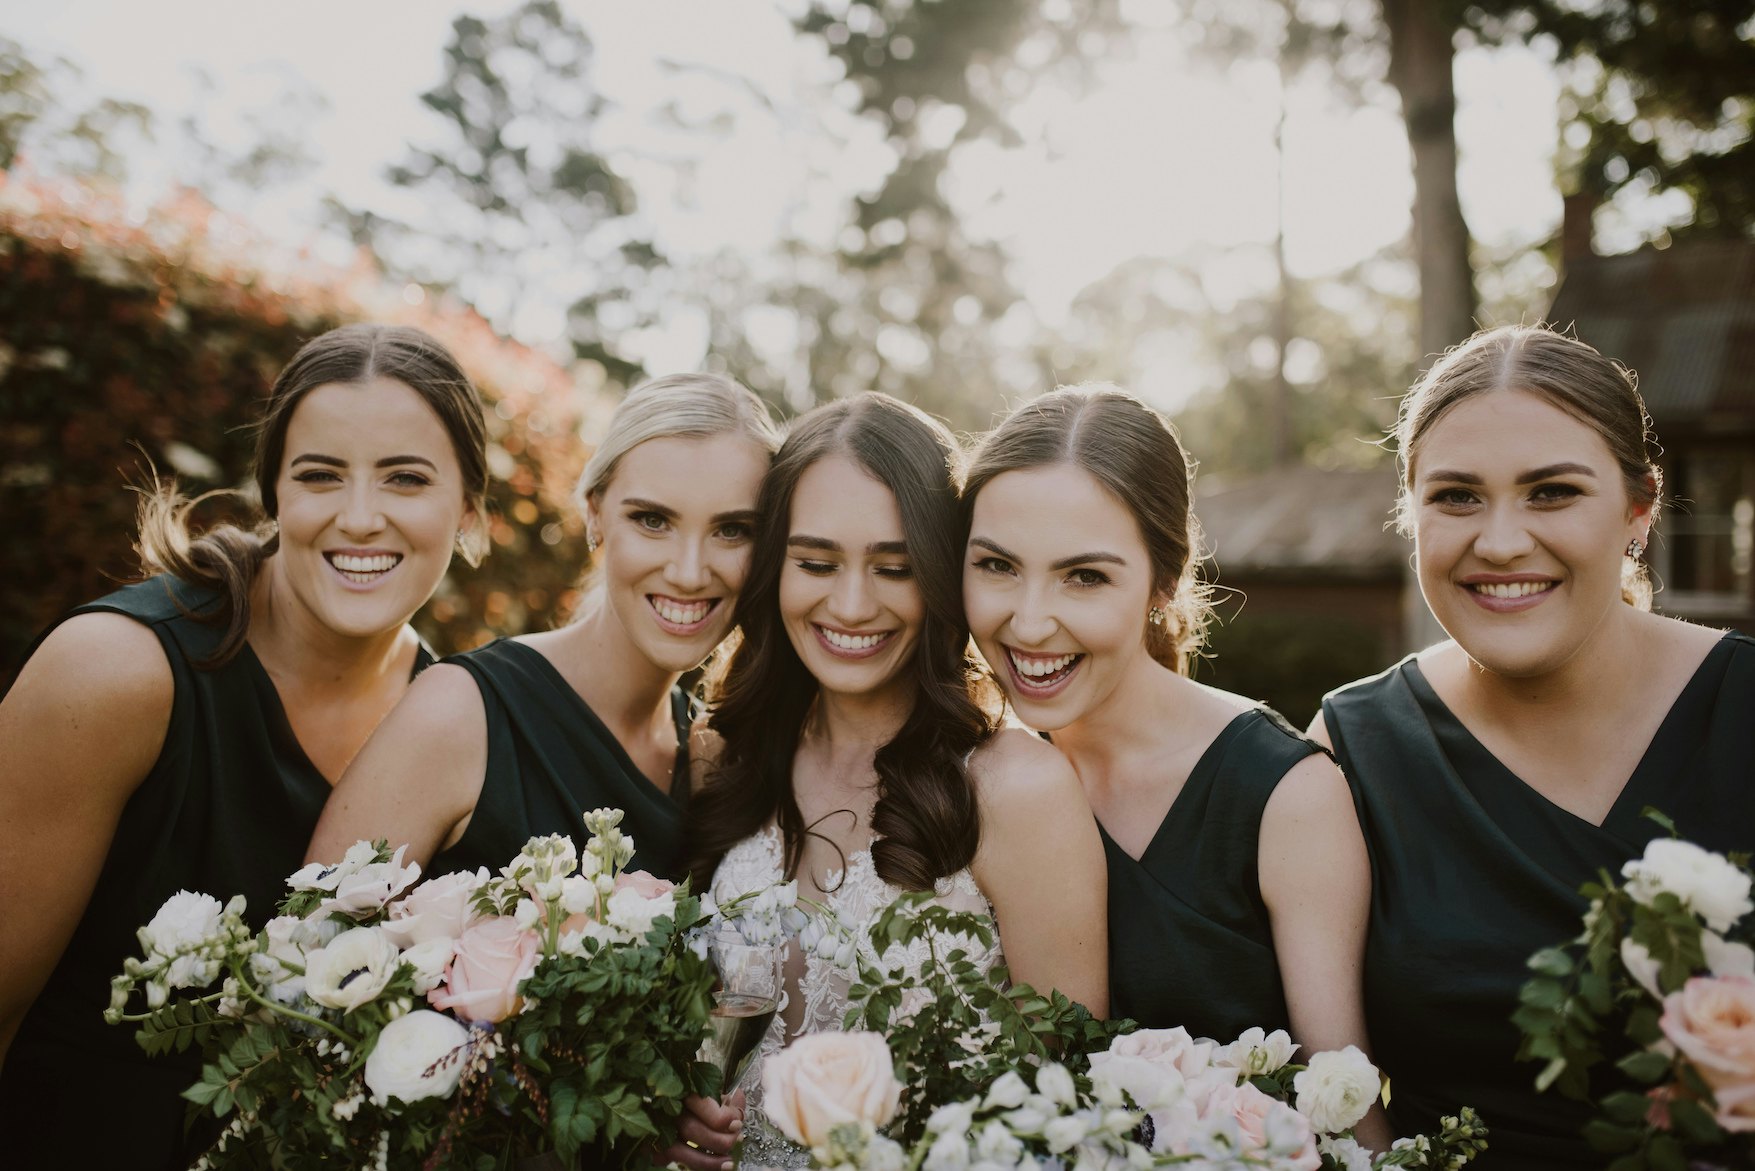 Bride and bridesmaids laughing together 